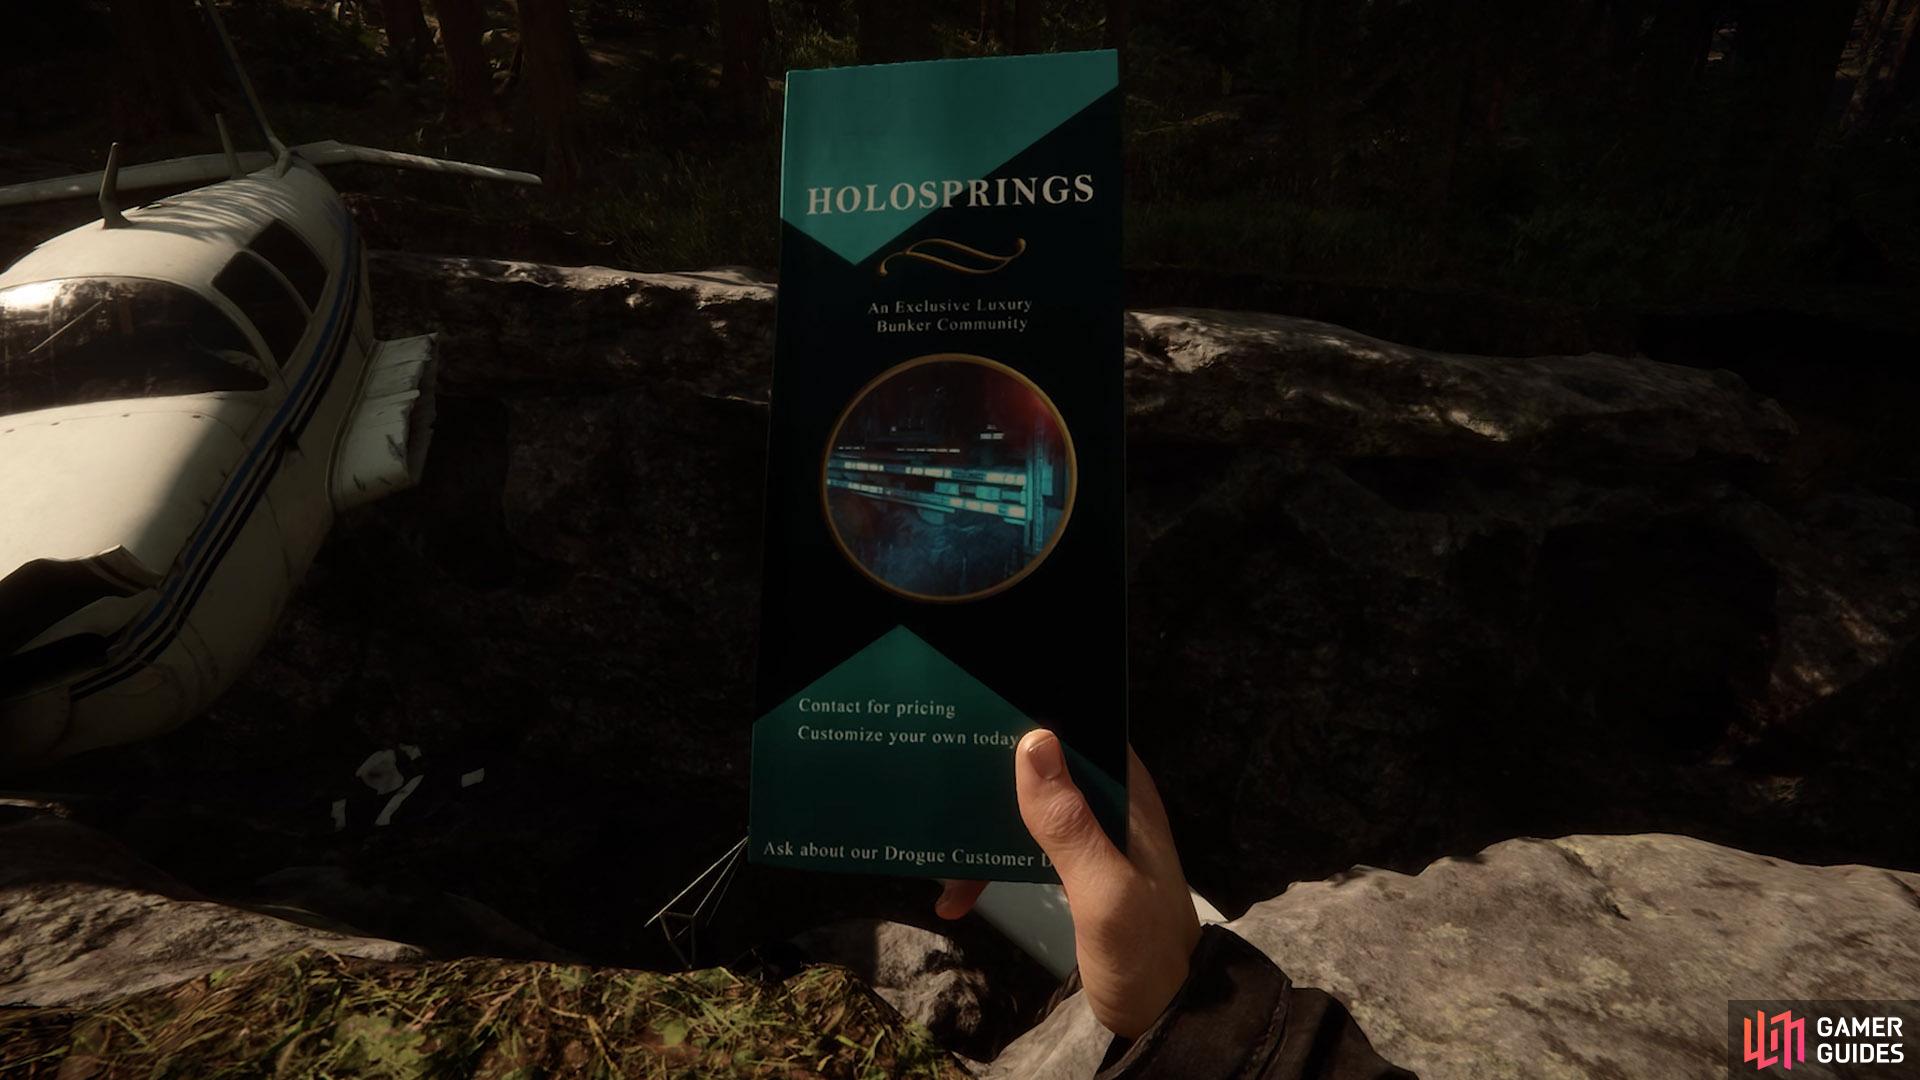 Holosprings pamphlet in Sons Of The Forest